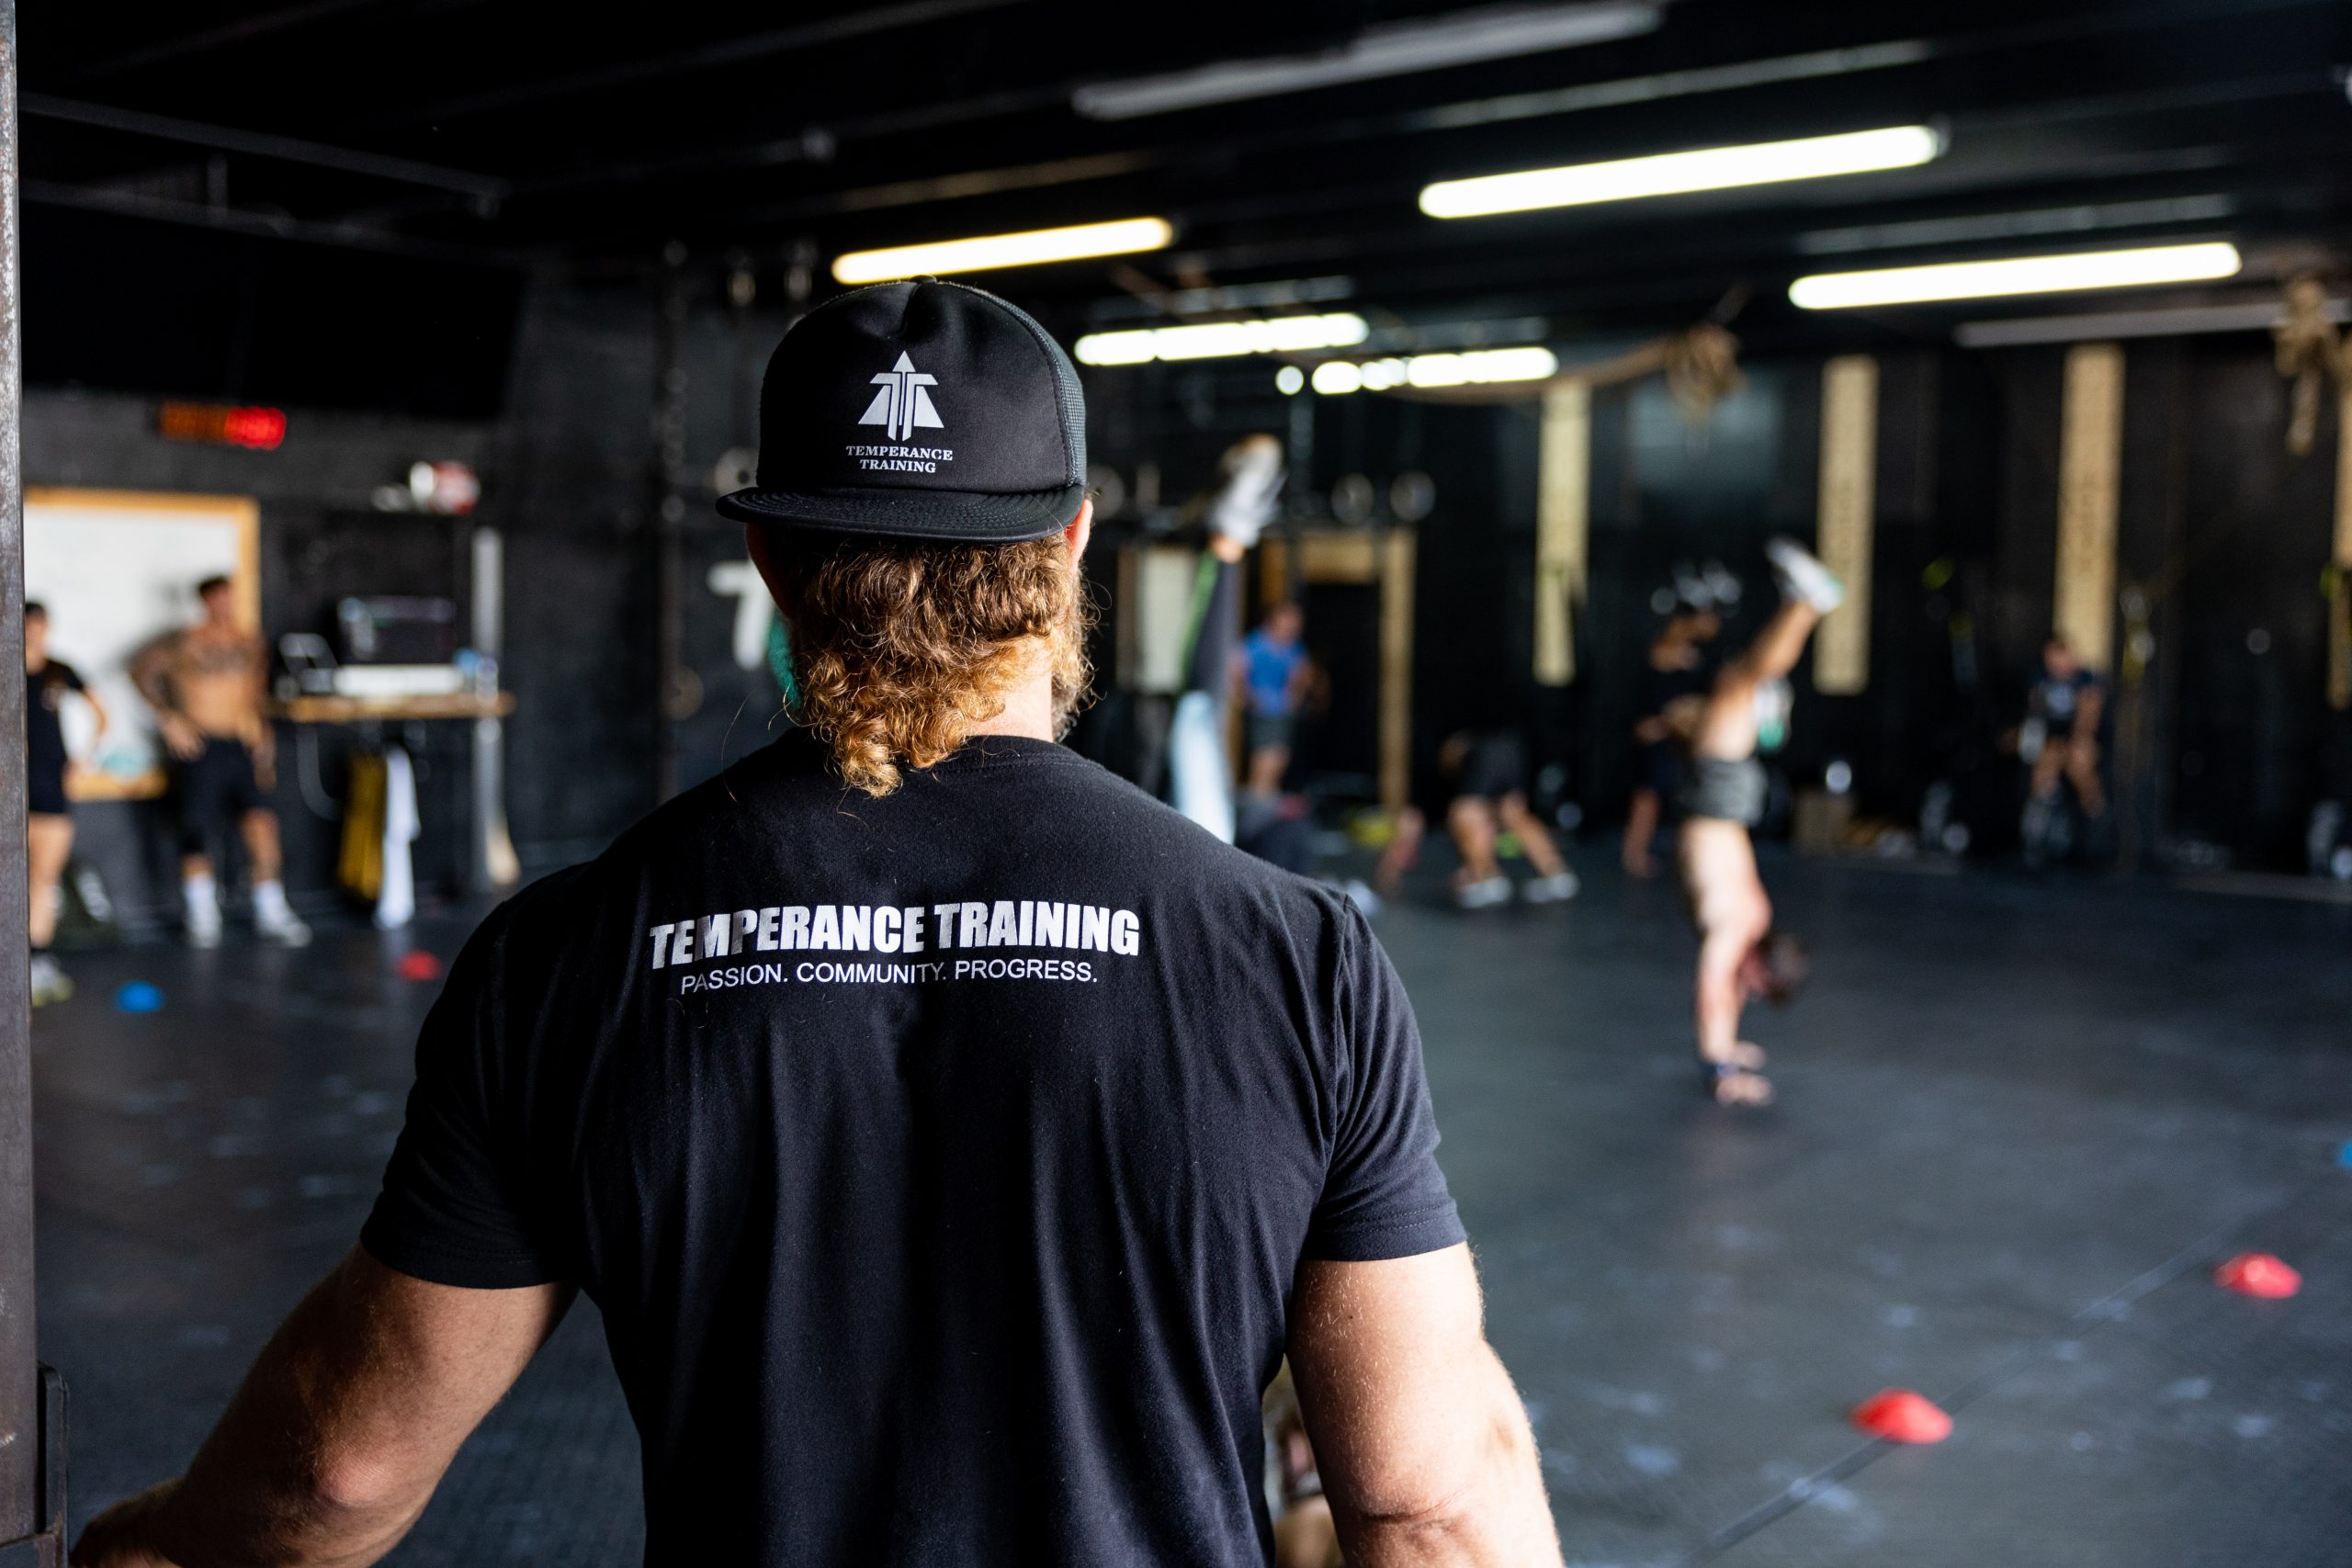 Temperance Training owner, Anthony Fazio faces away from the camera during a CrossFit class.